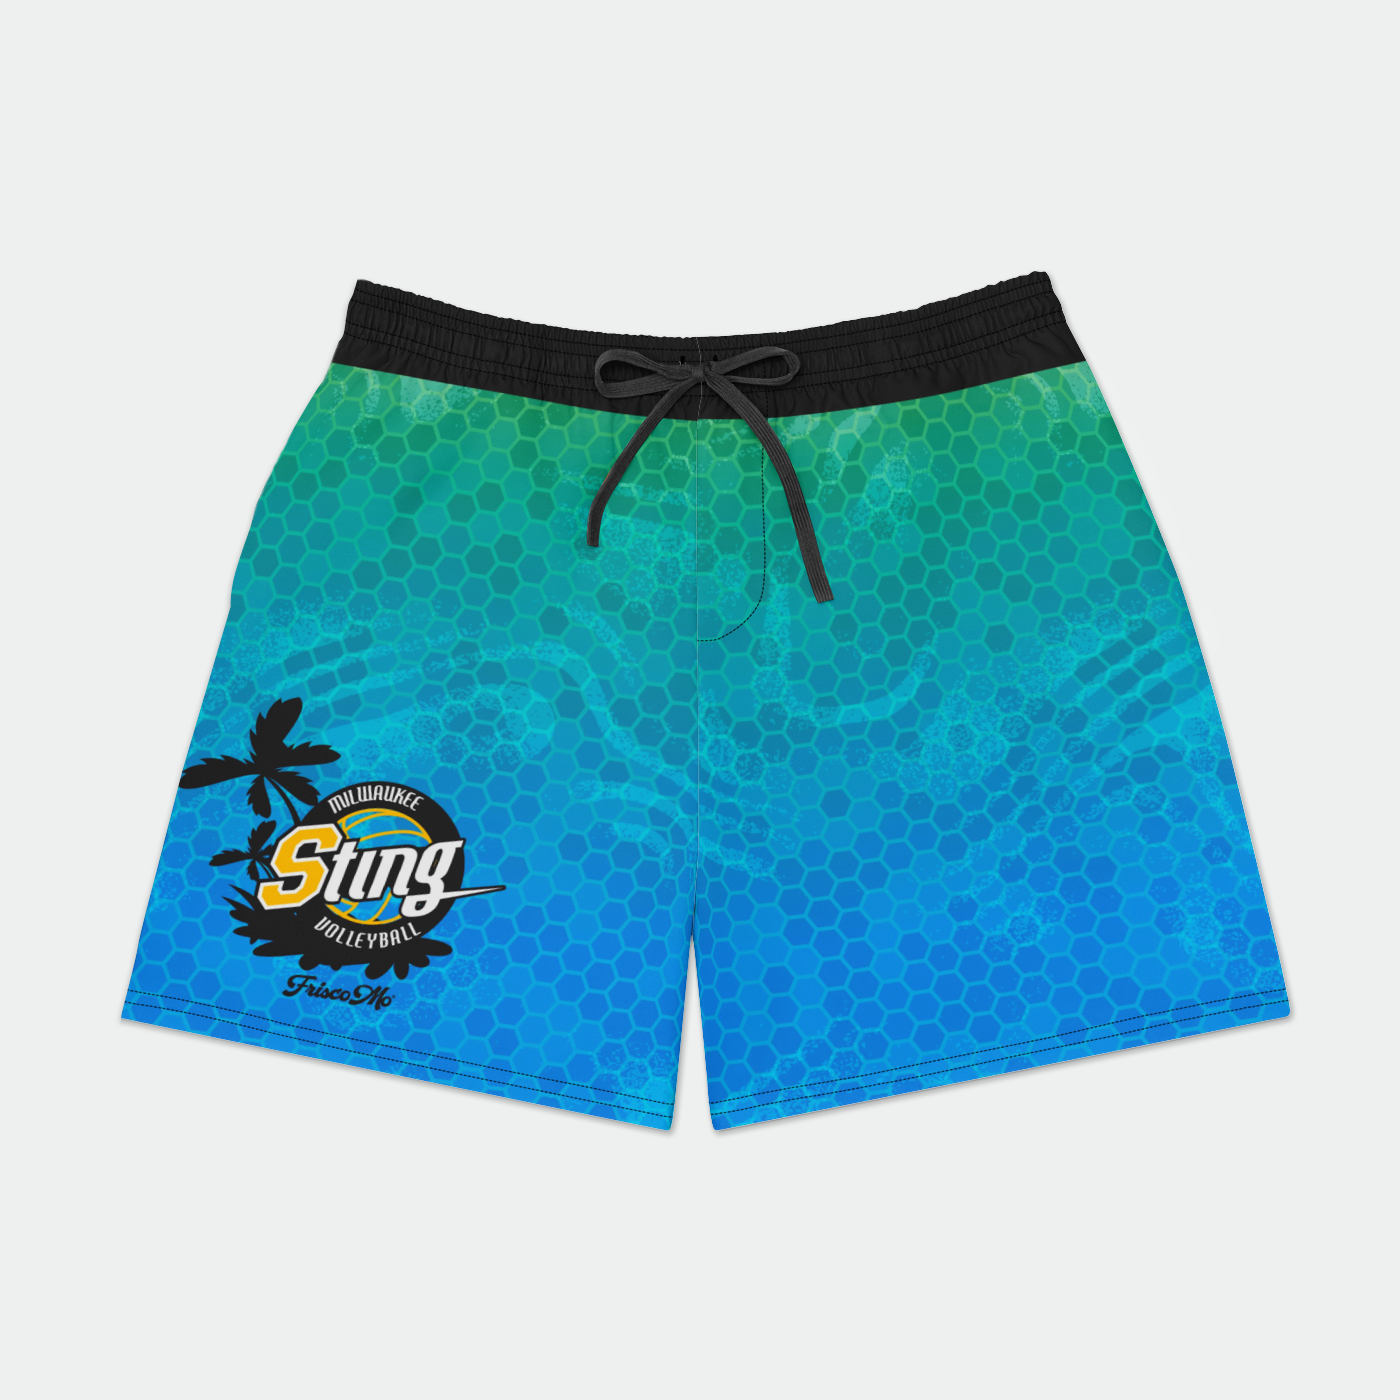 Sting 16-3s Palm Ombre Volleys